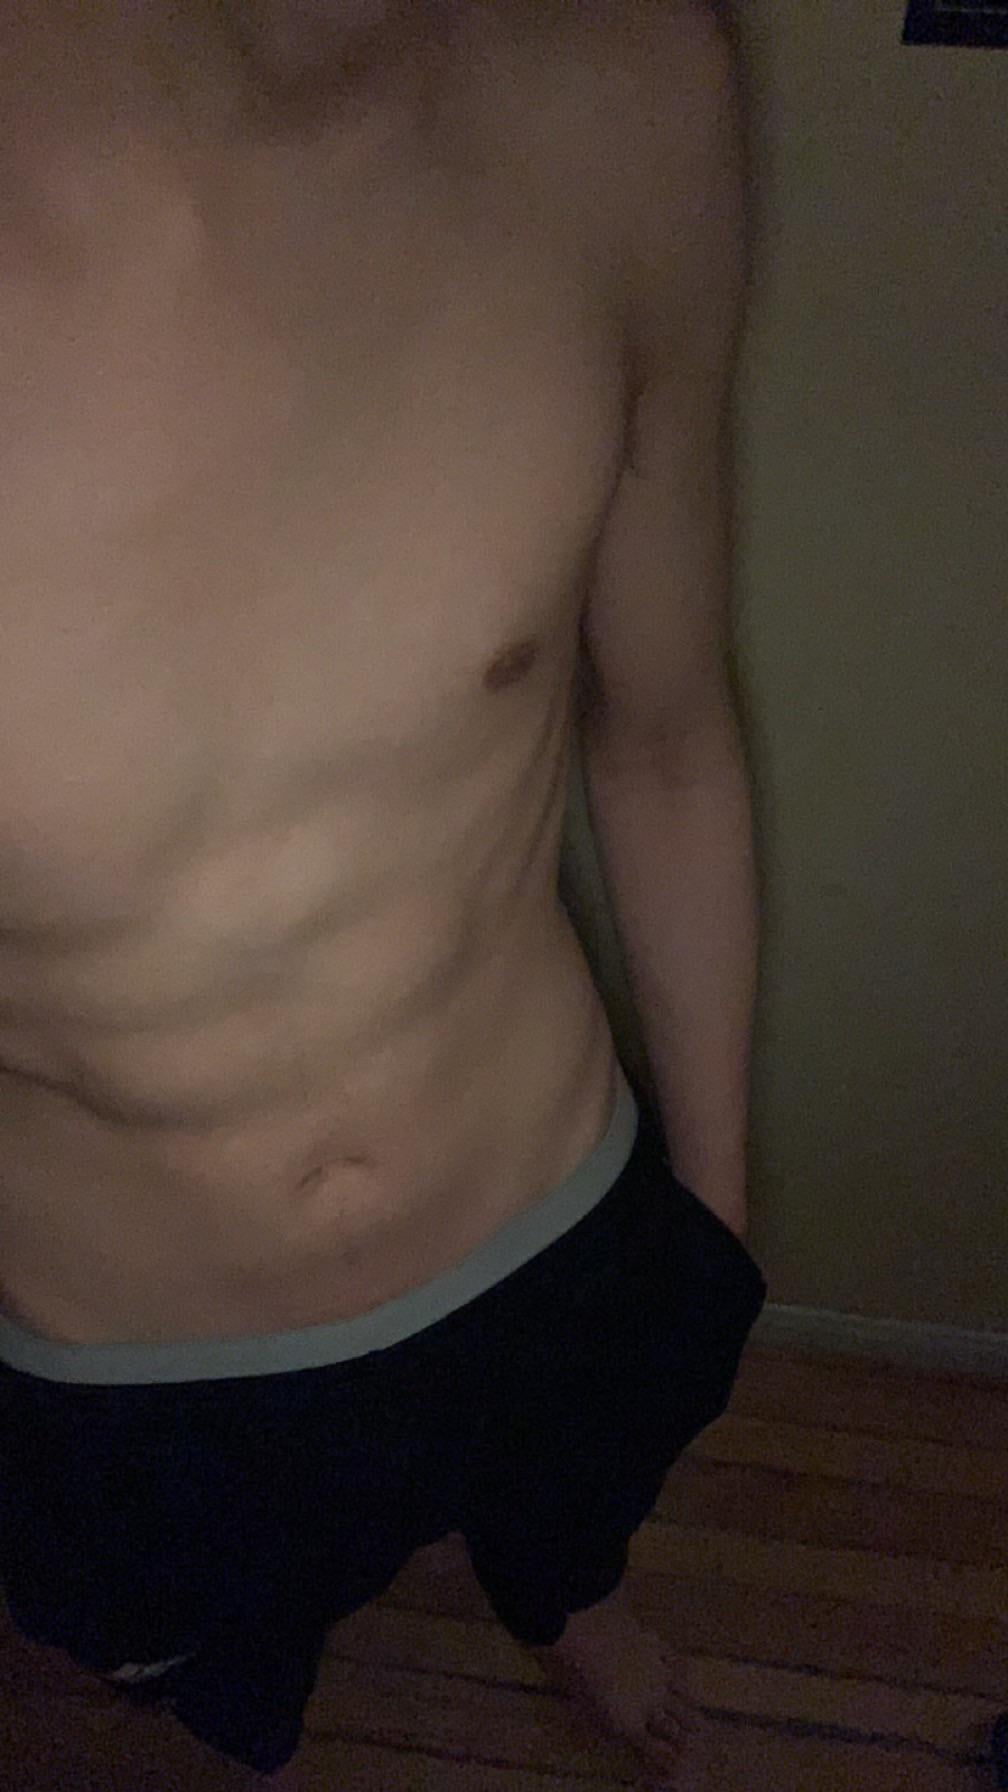 Any sub gym bros to flex and show off for